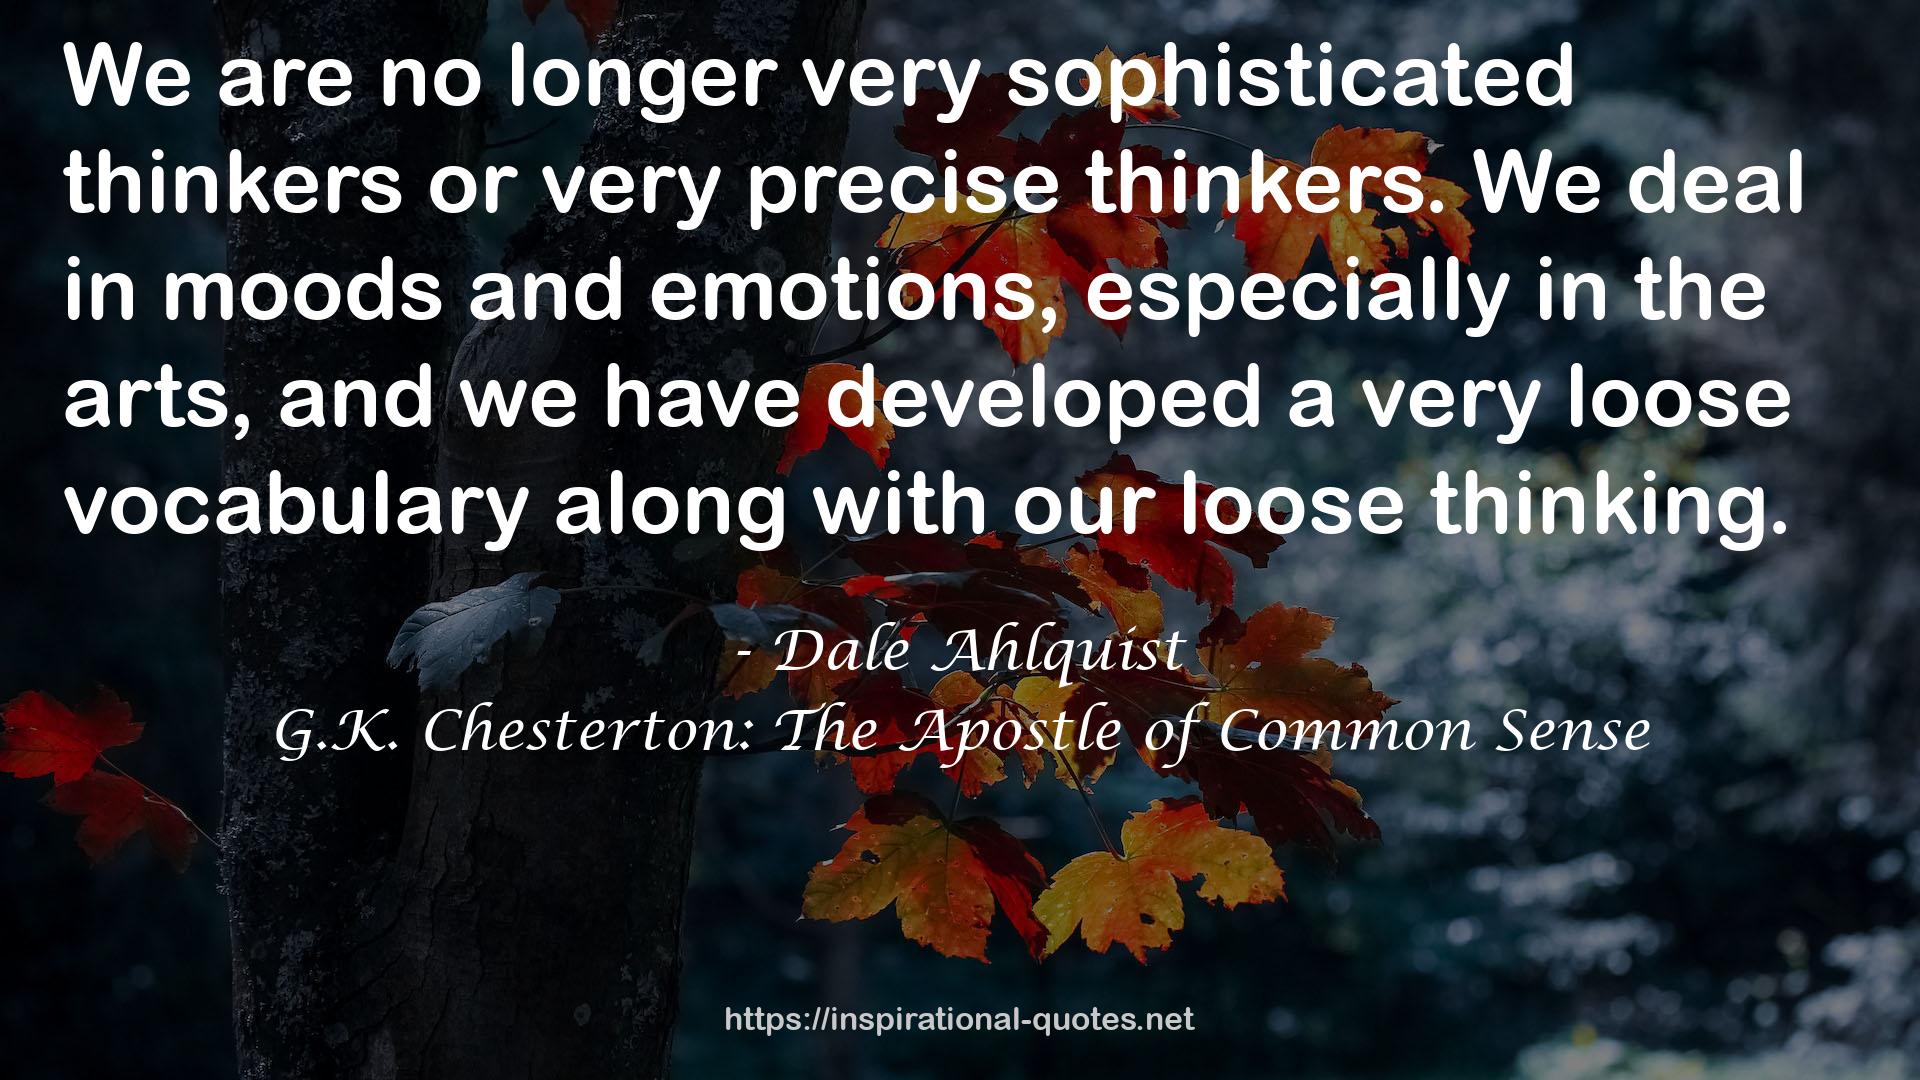 Dale Ahlquist QUOTES